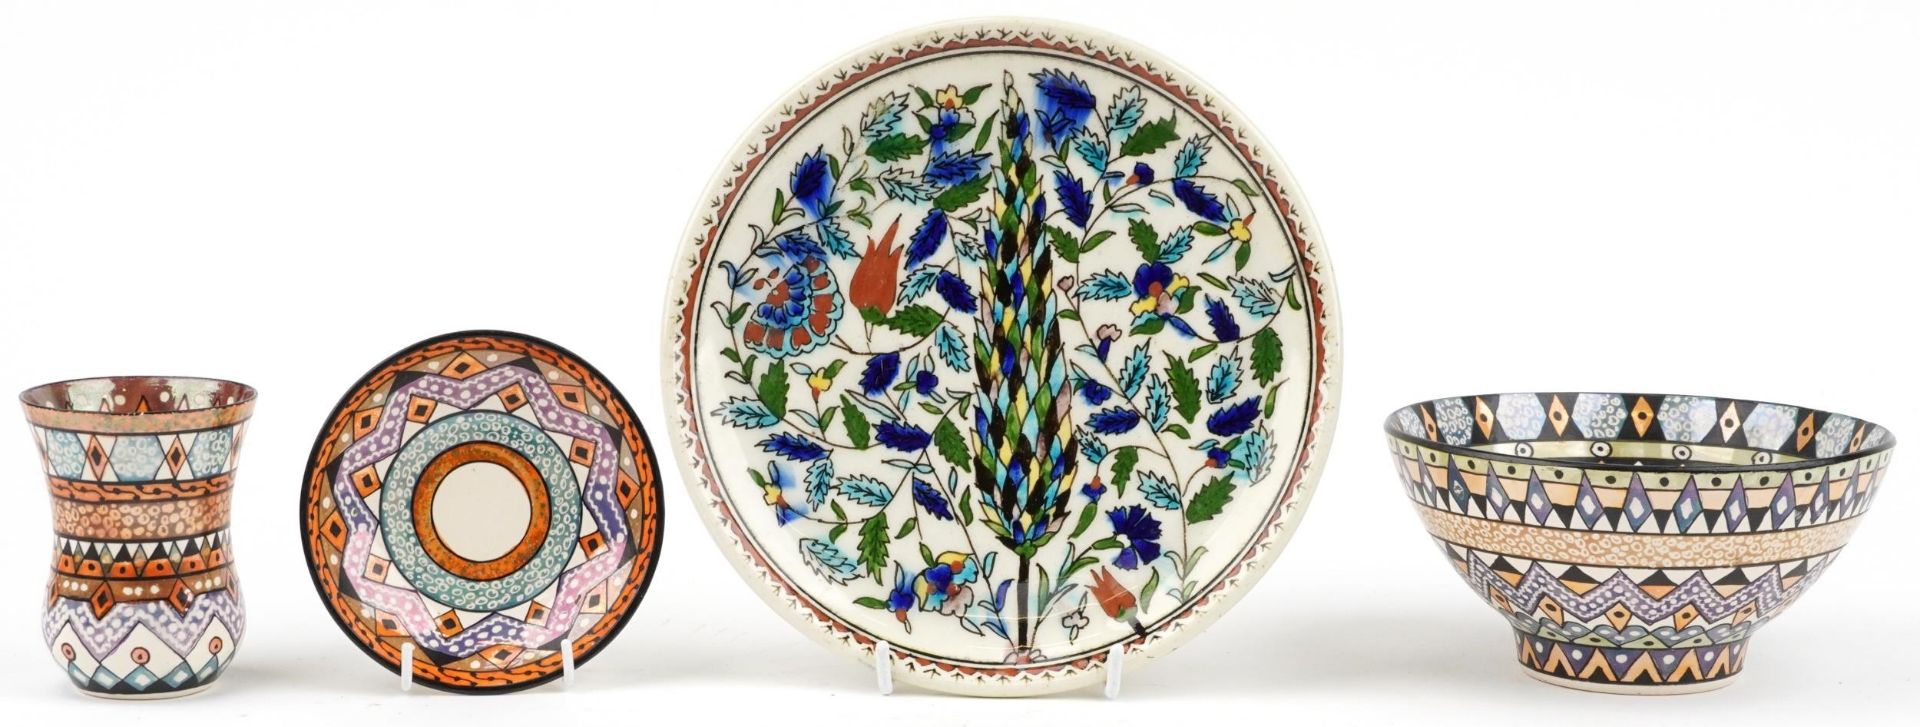 Turkish Kutahya wall plate hand painted with flowers and ceramics from Azerbaijan comprising bowl,